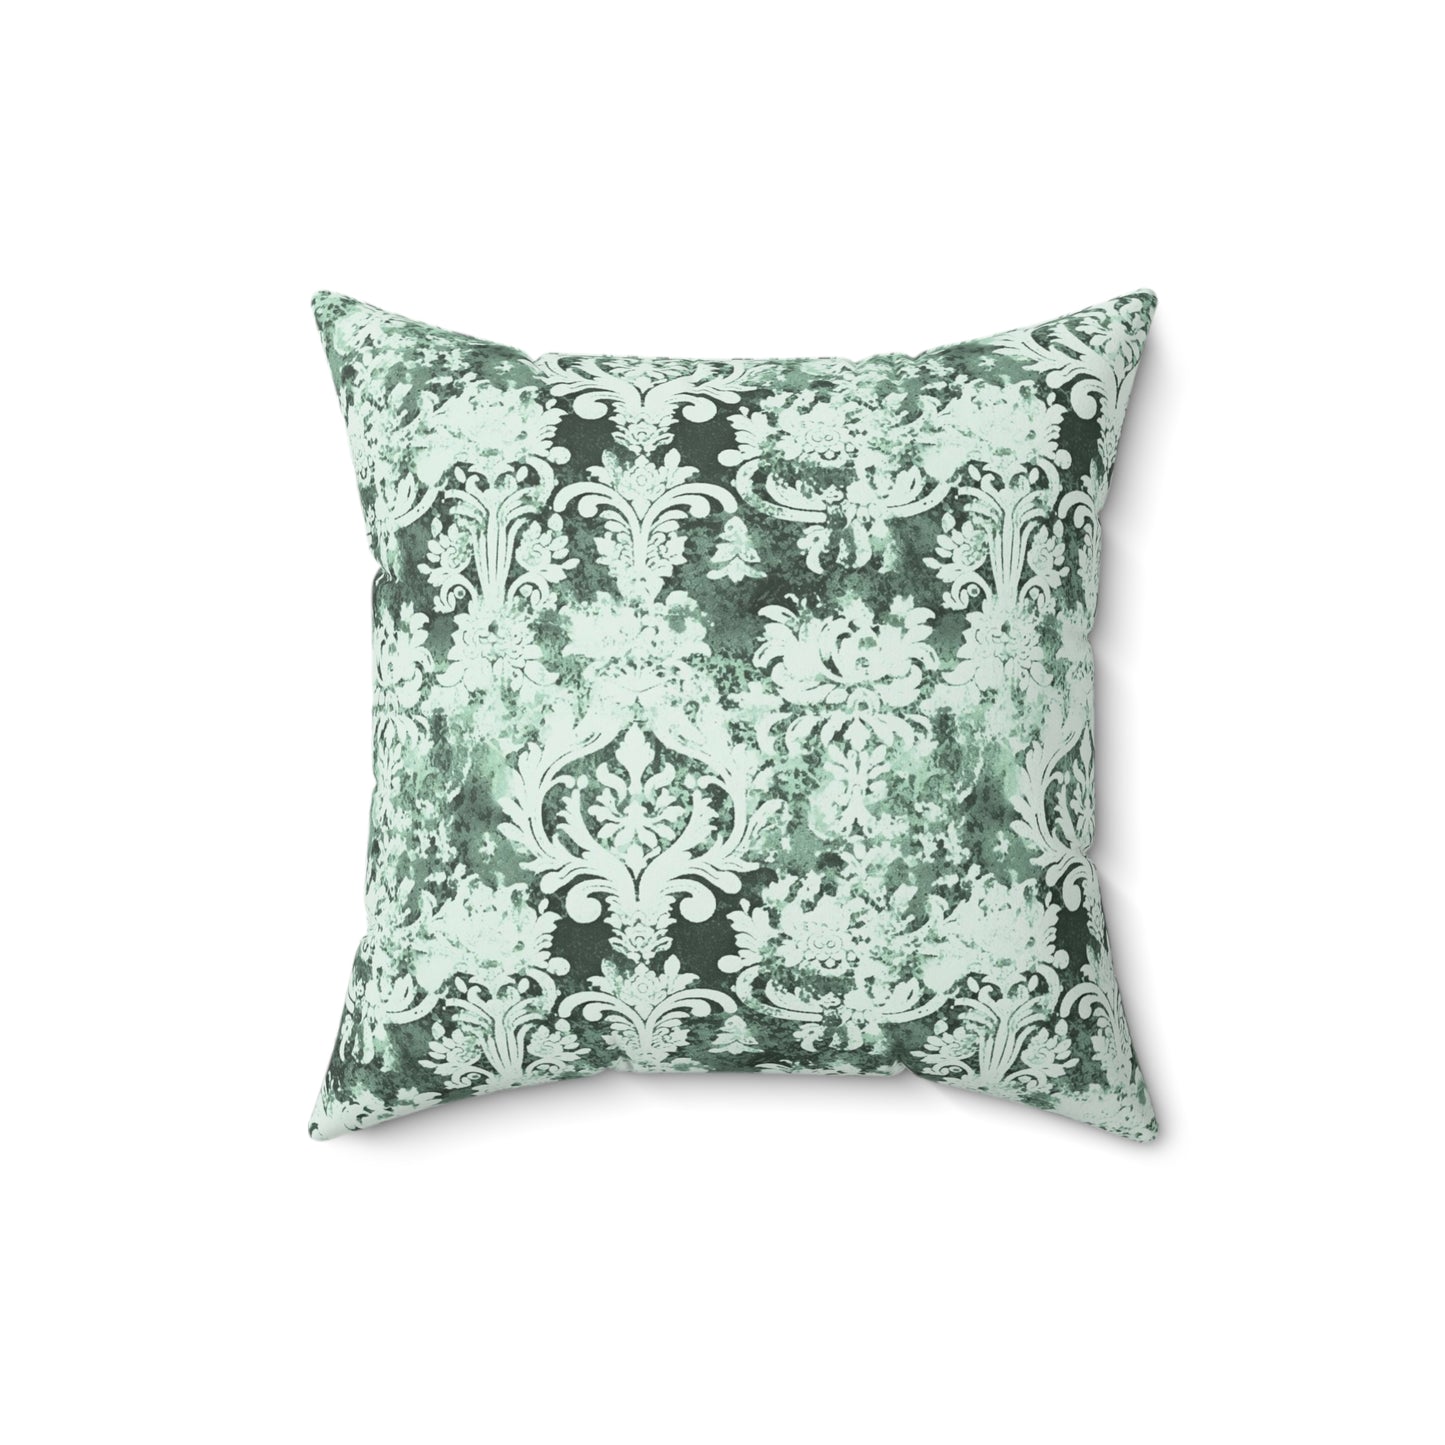 Vintage Green Damask 77 - Beautiful, Shabby Chic, Boho, Fun - Faux Suede Square Pillow